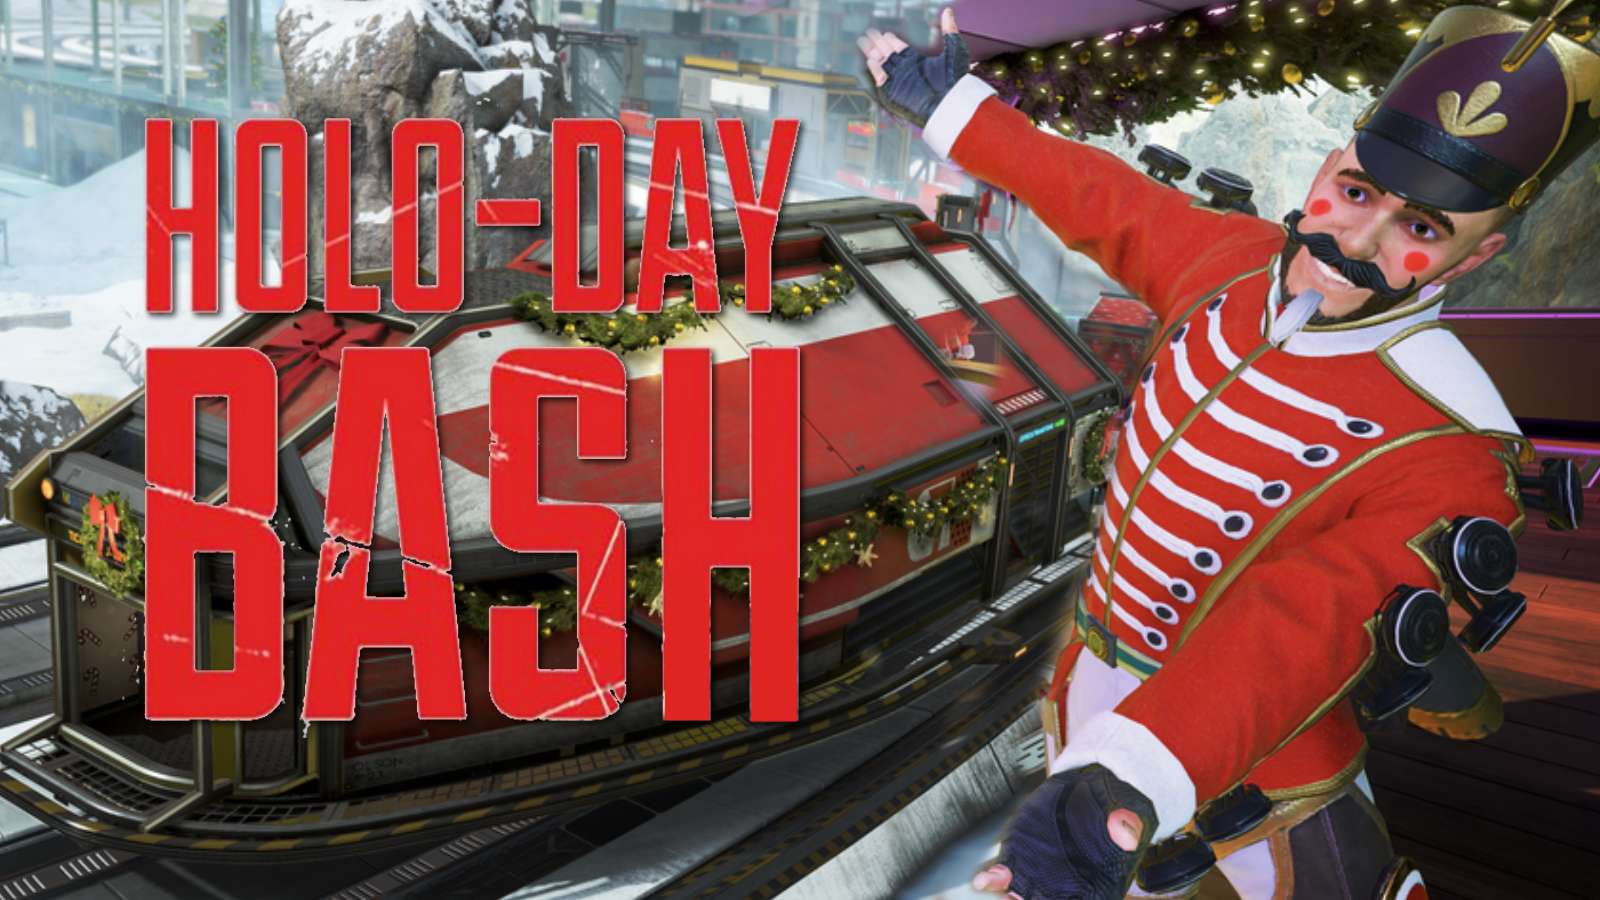 Mirage Holo-Day Bash in Apex Legends